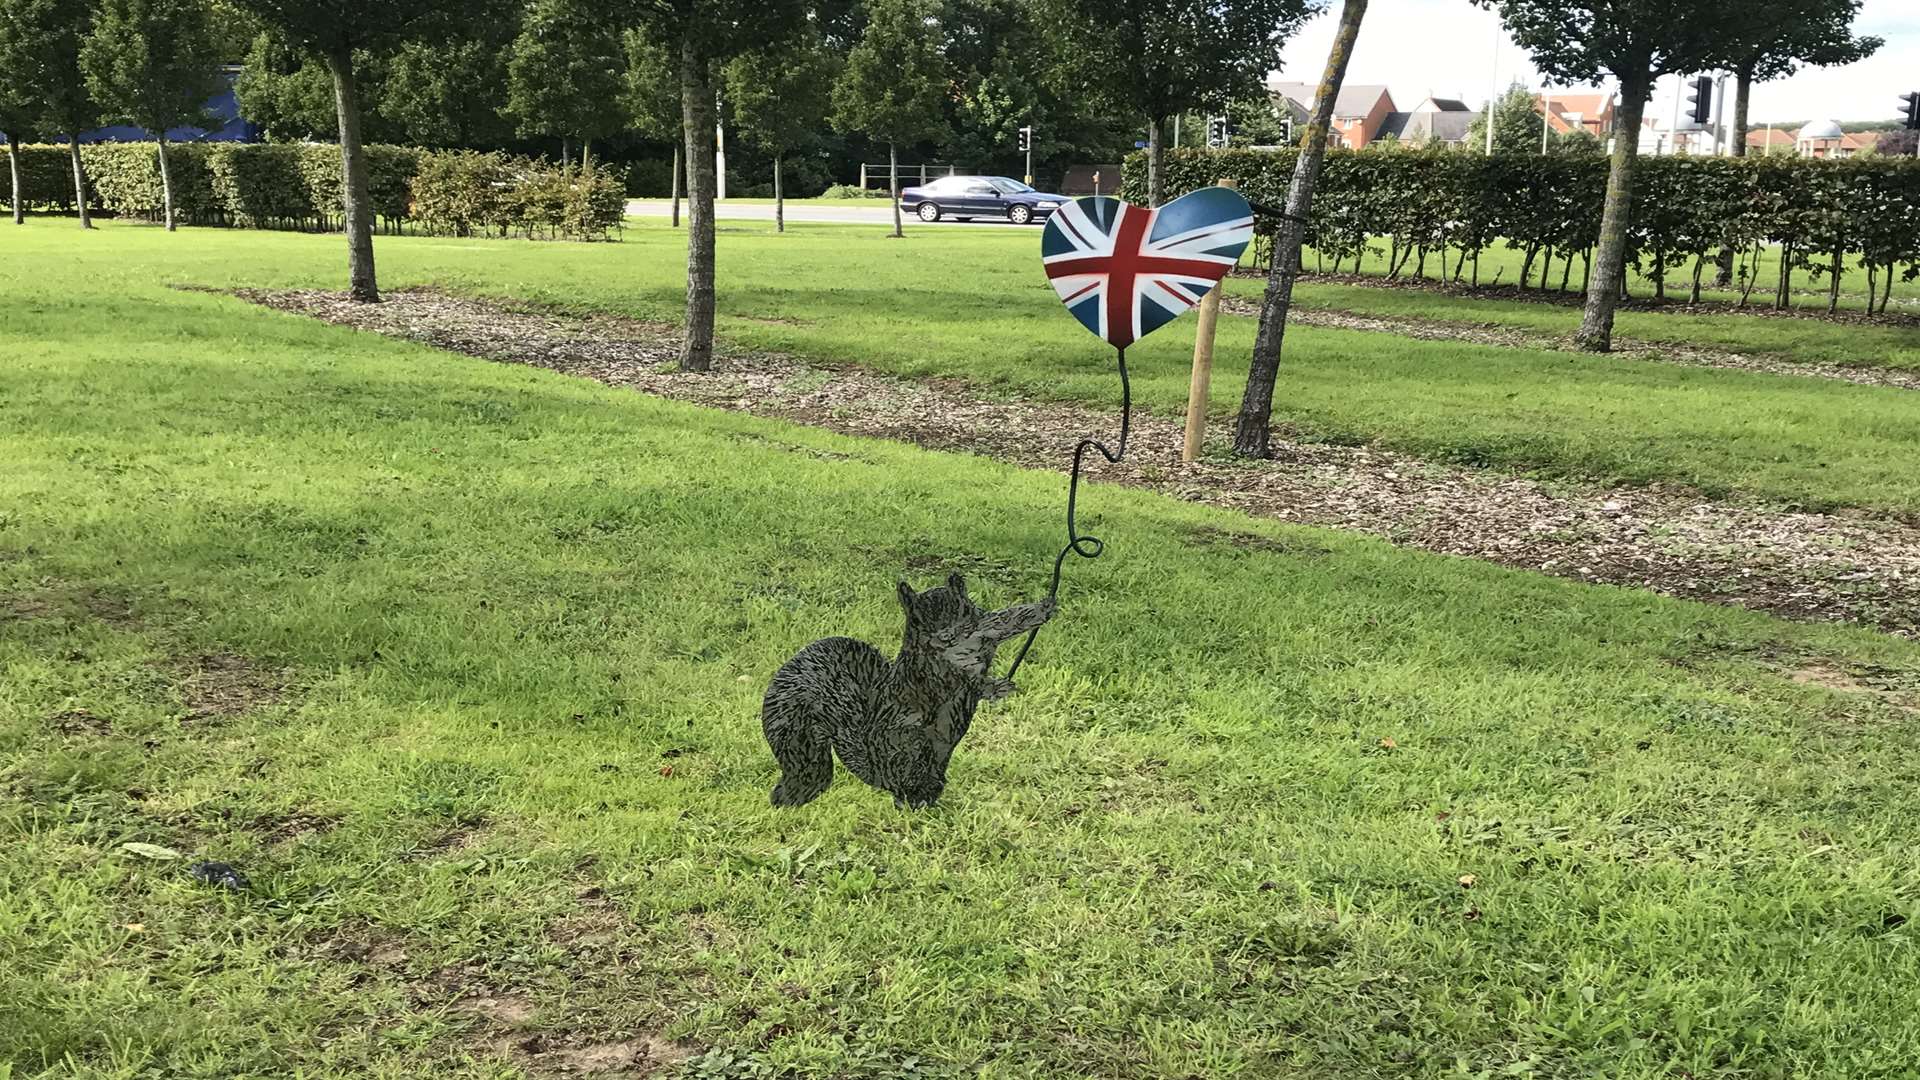 The squirrel is located on Drovers Roundabout